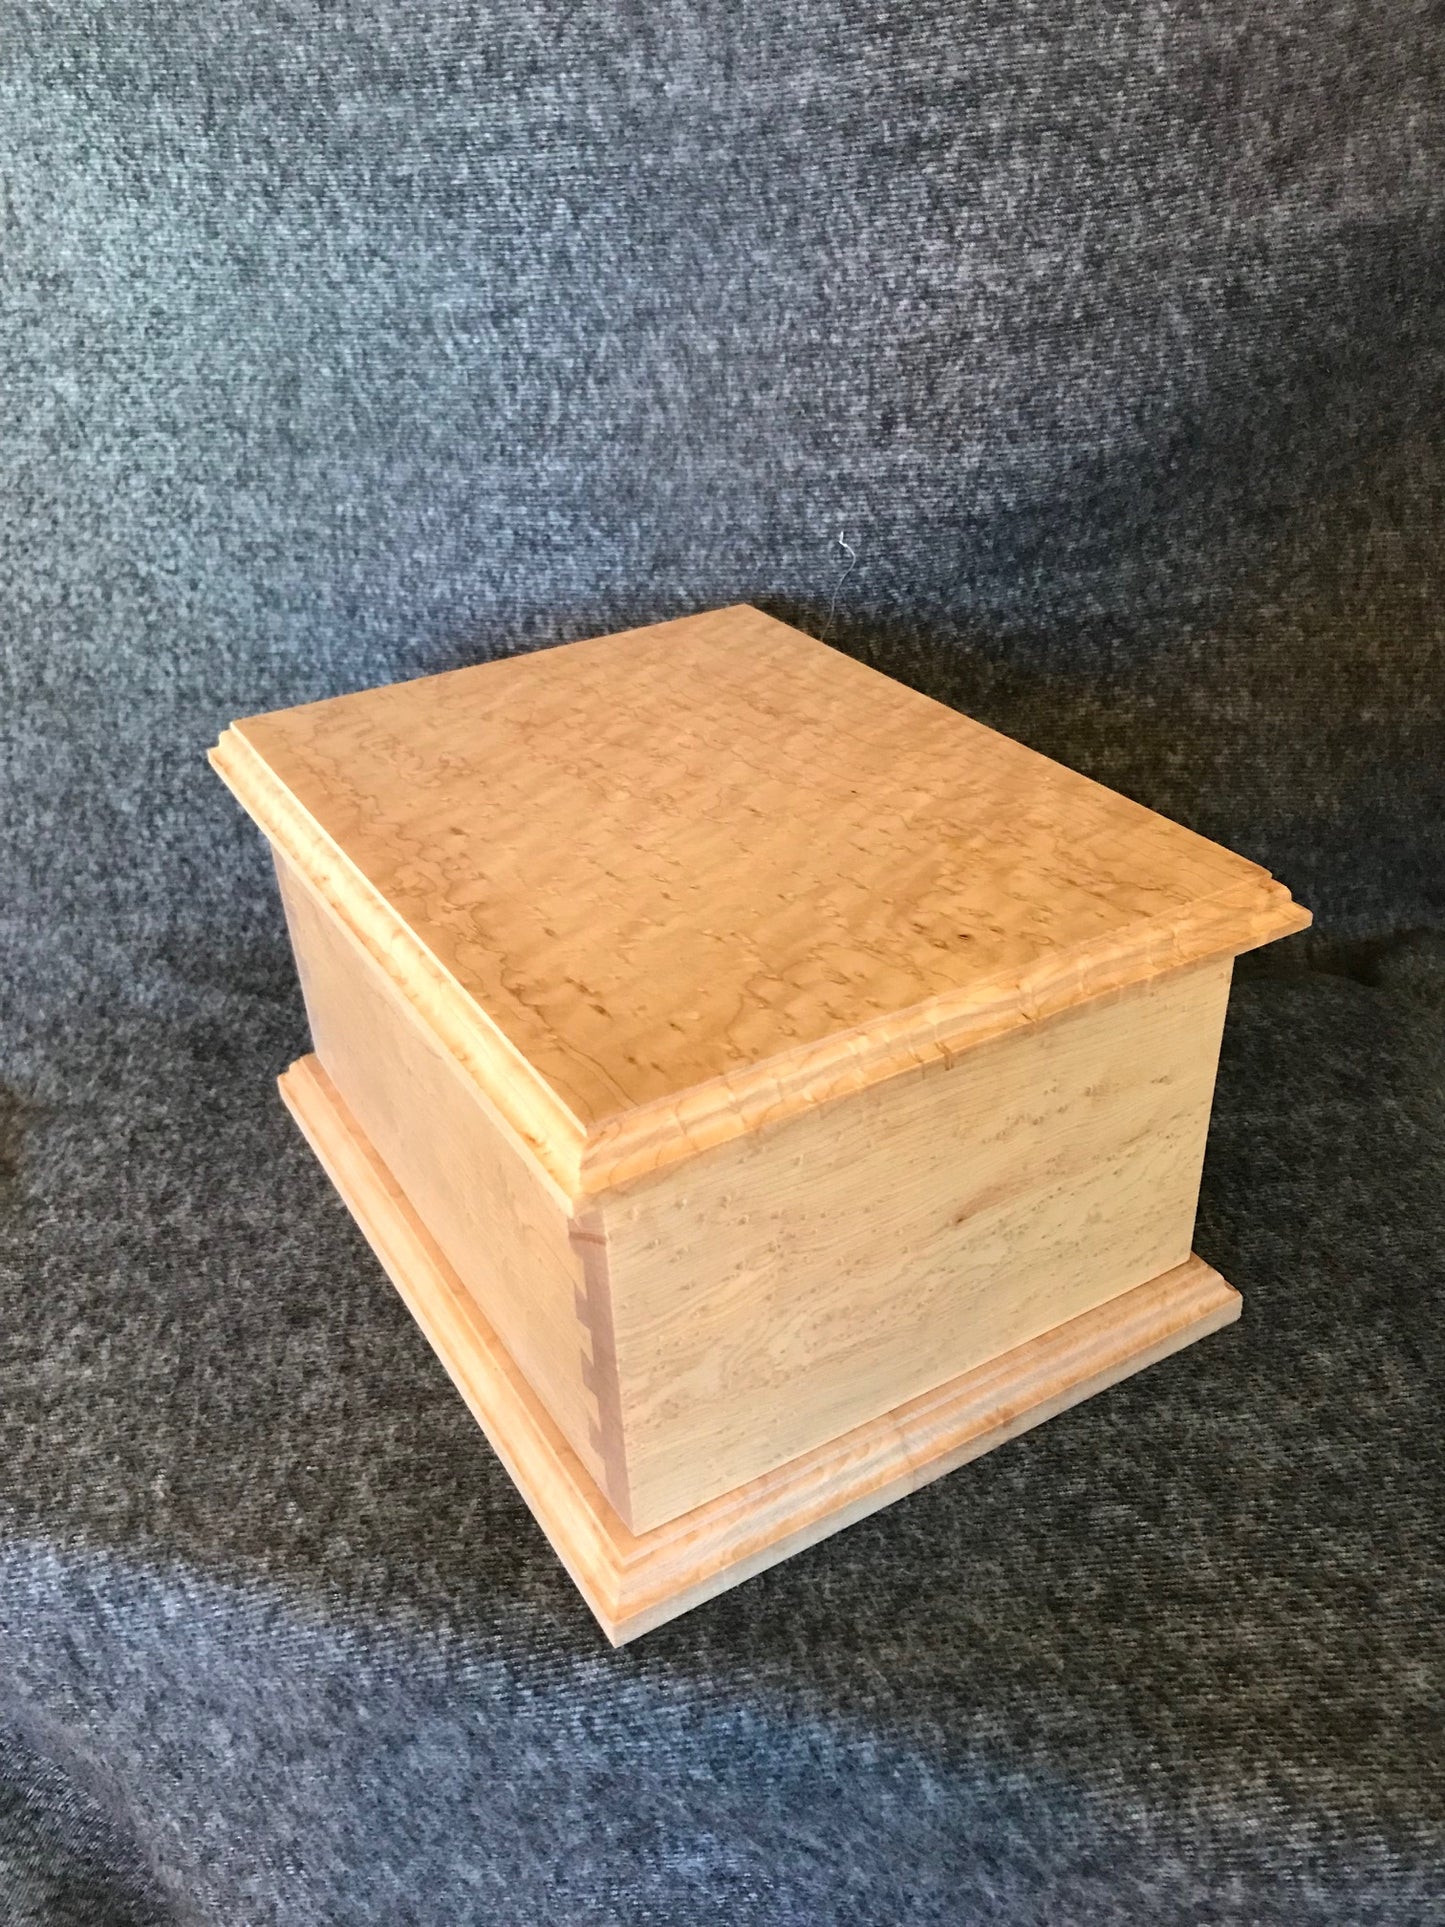 Birdseye Maple Dovetail Cremation Urn for Adult Human Ashes, up to 230 pounds